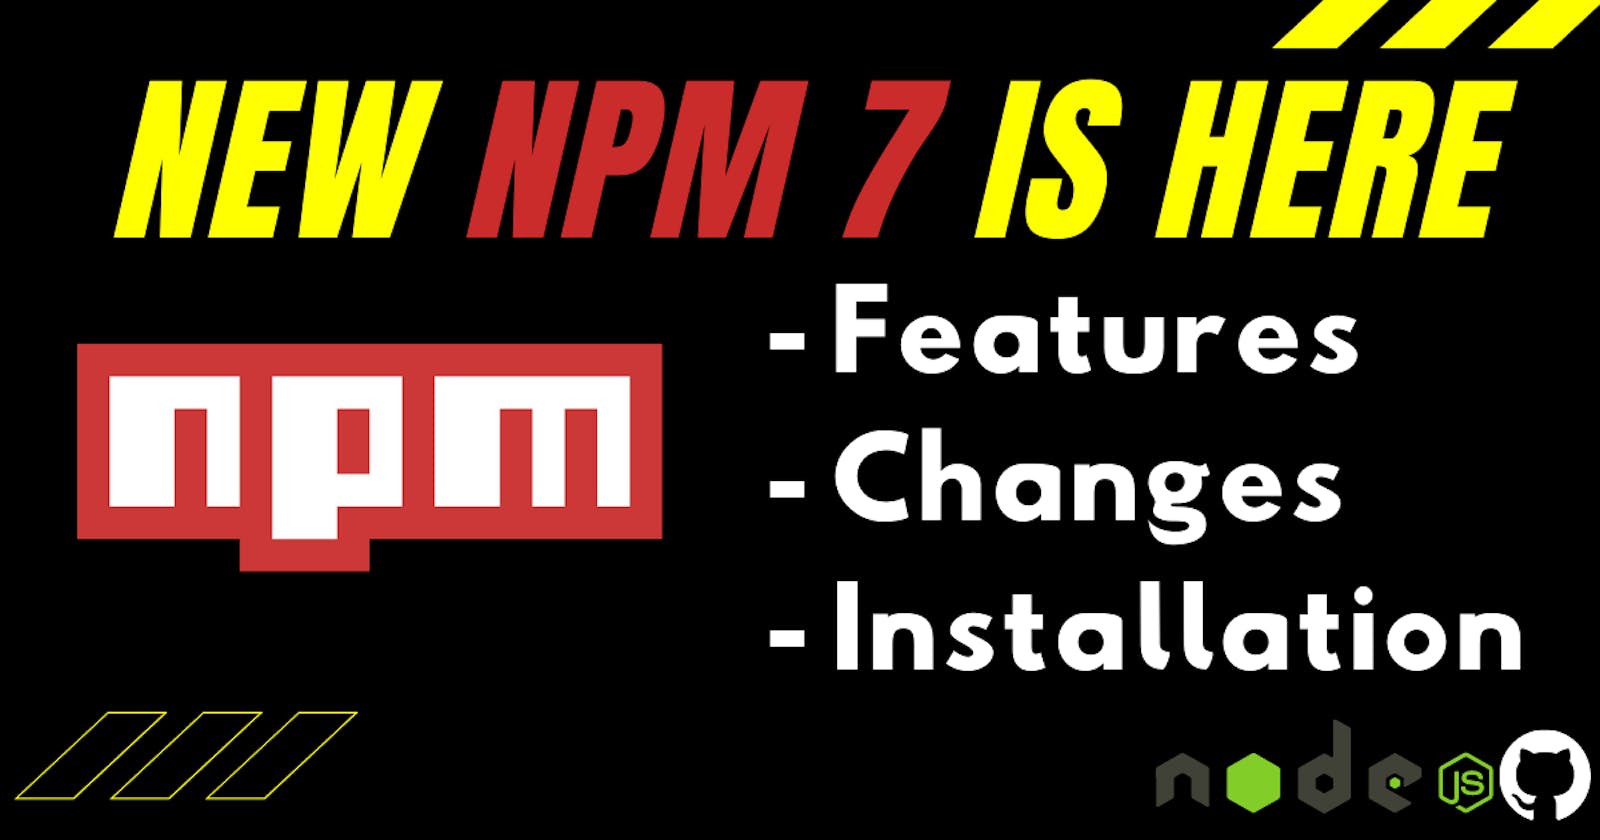 Finally, it's out - The NPM 7